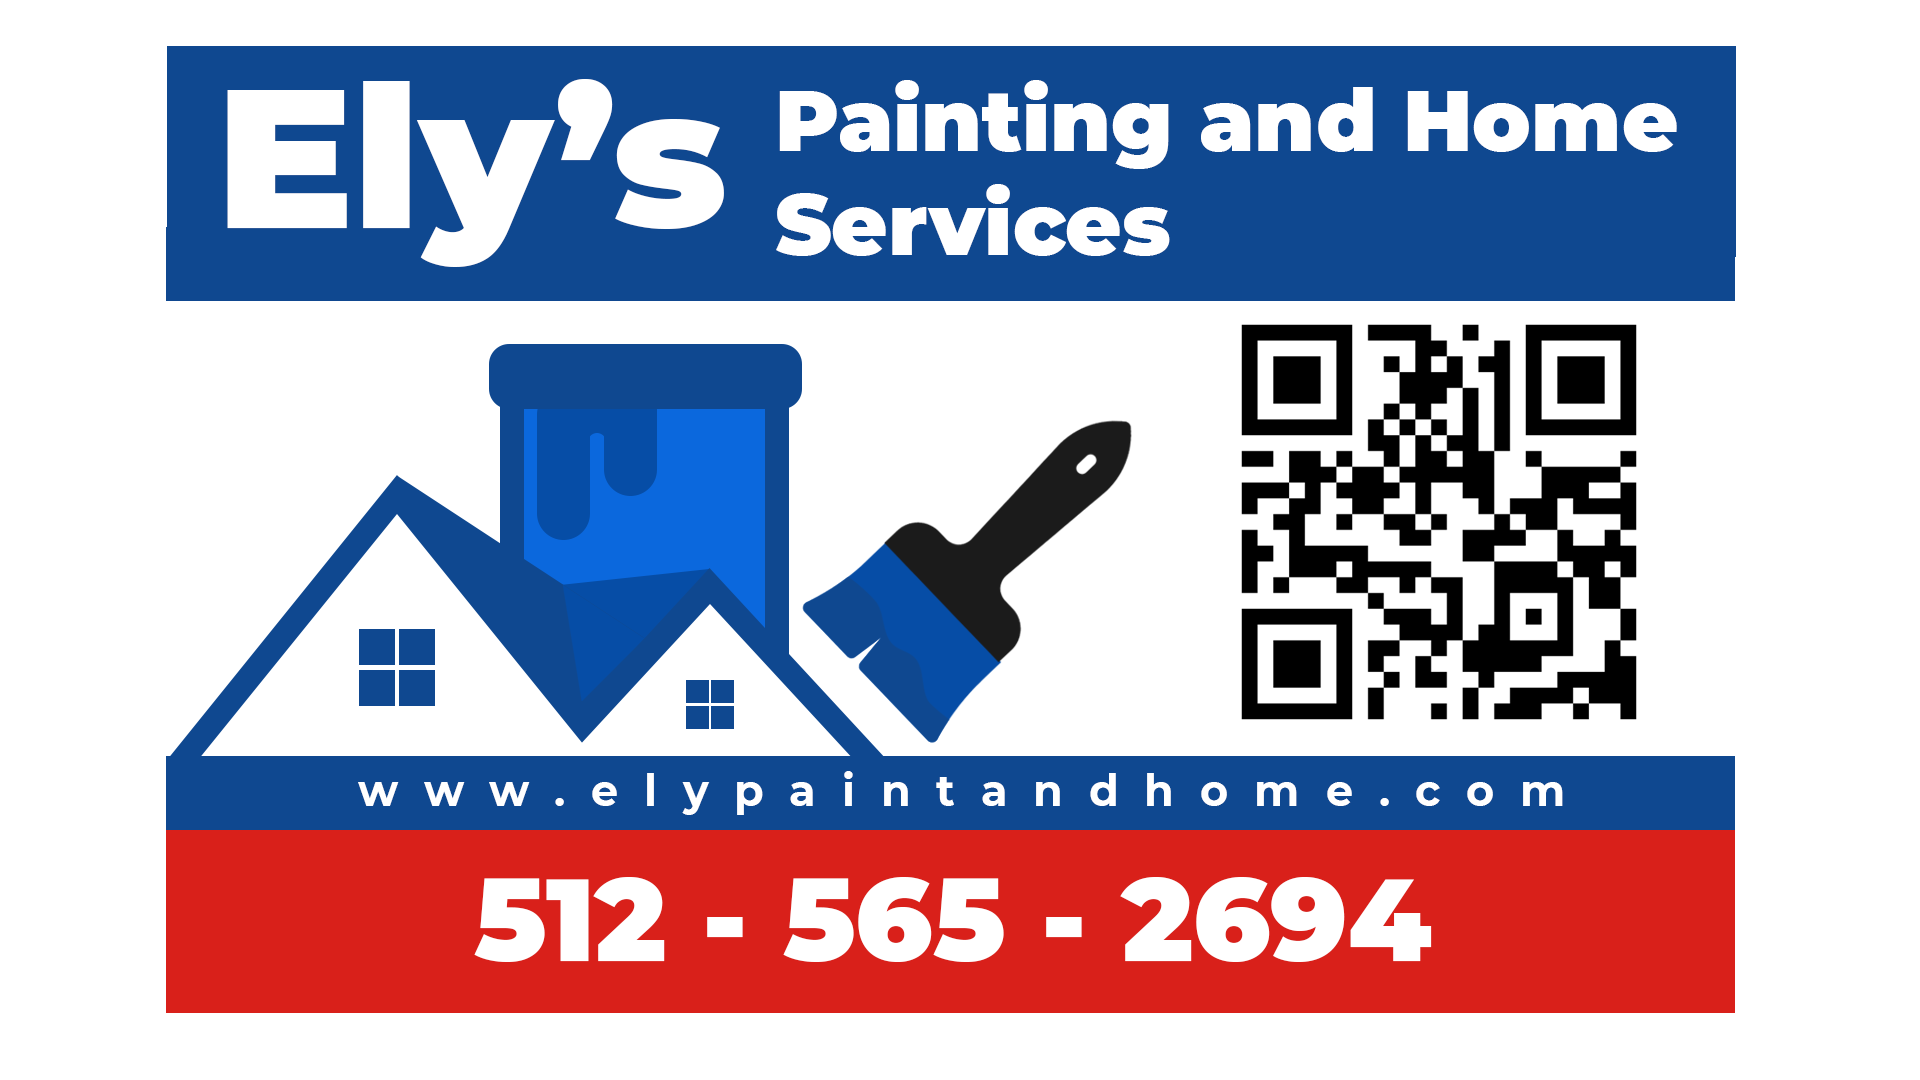 Elys Painting and Home Services